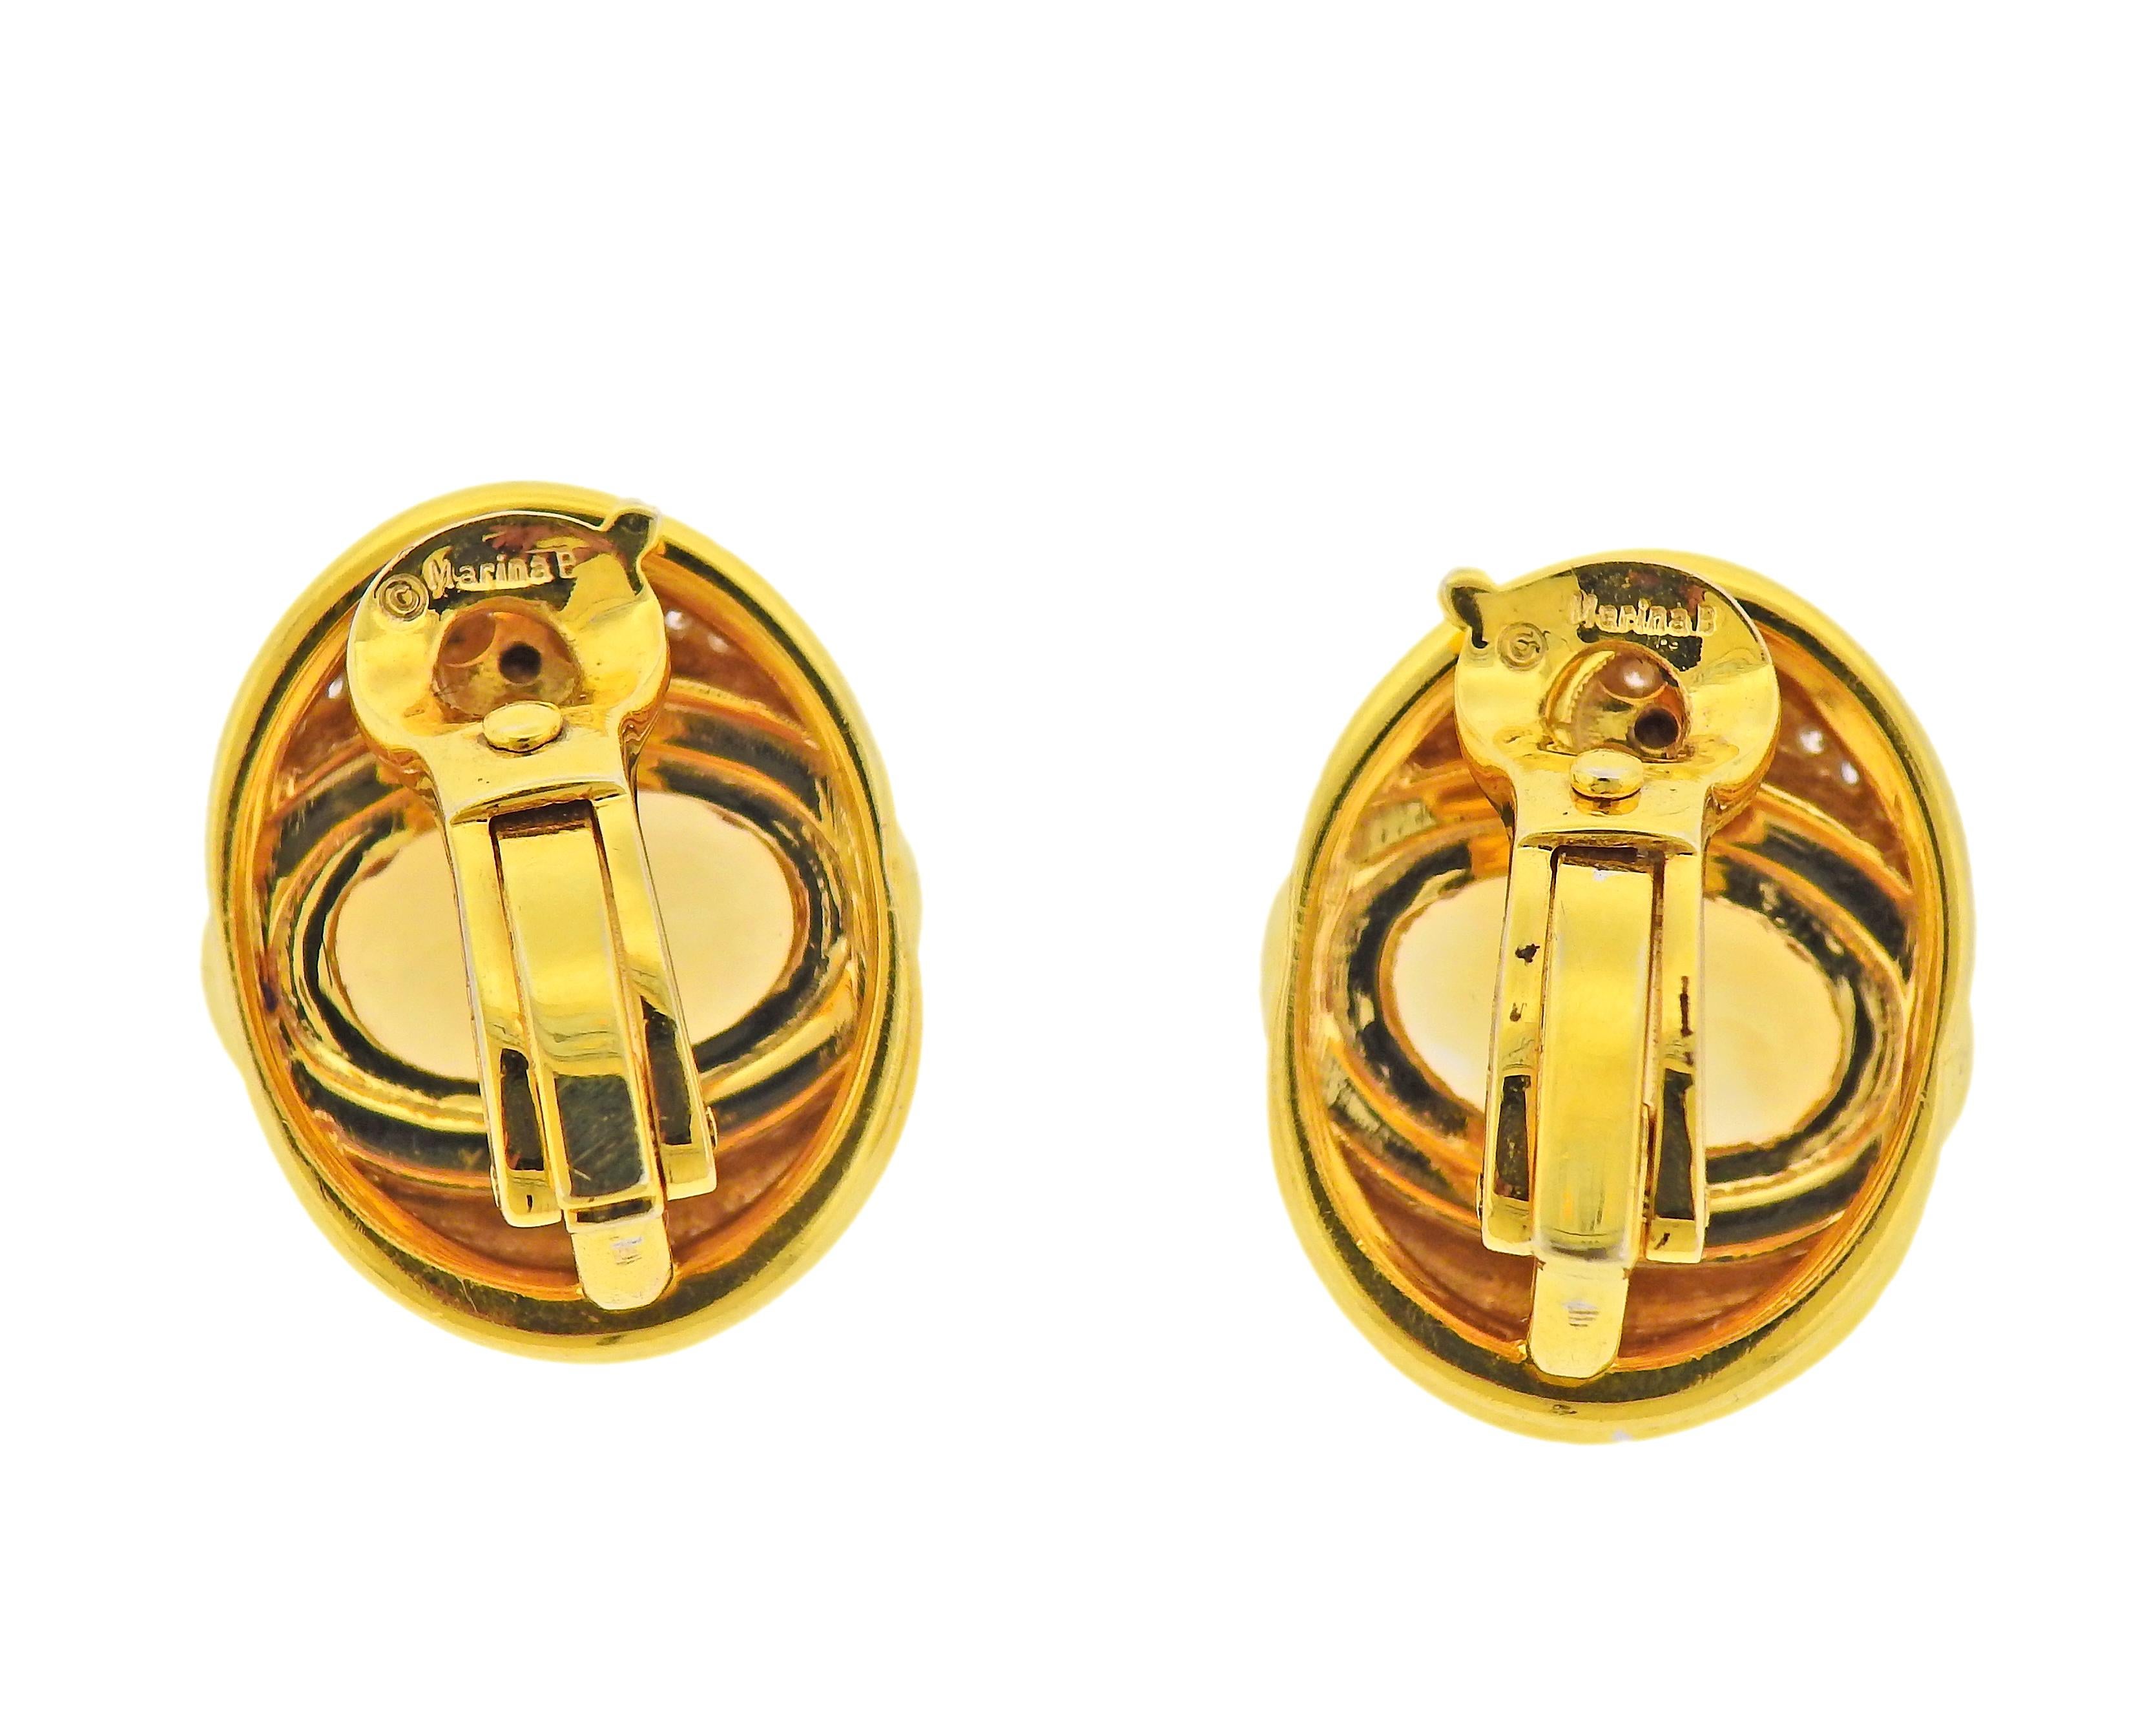 Pair of 18k yellow gold earrings by Marina B, with oval citrines and approx. 1.00ctw in diamonds. Earrings measure 22mm x 19mm. Marked: Marina B, MB 750, C2806. Weight - 24.7 grams.